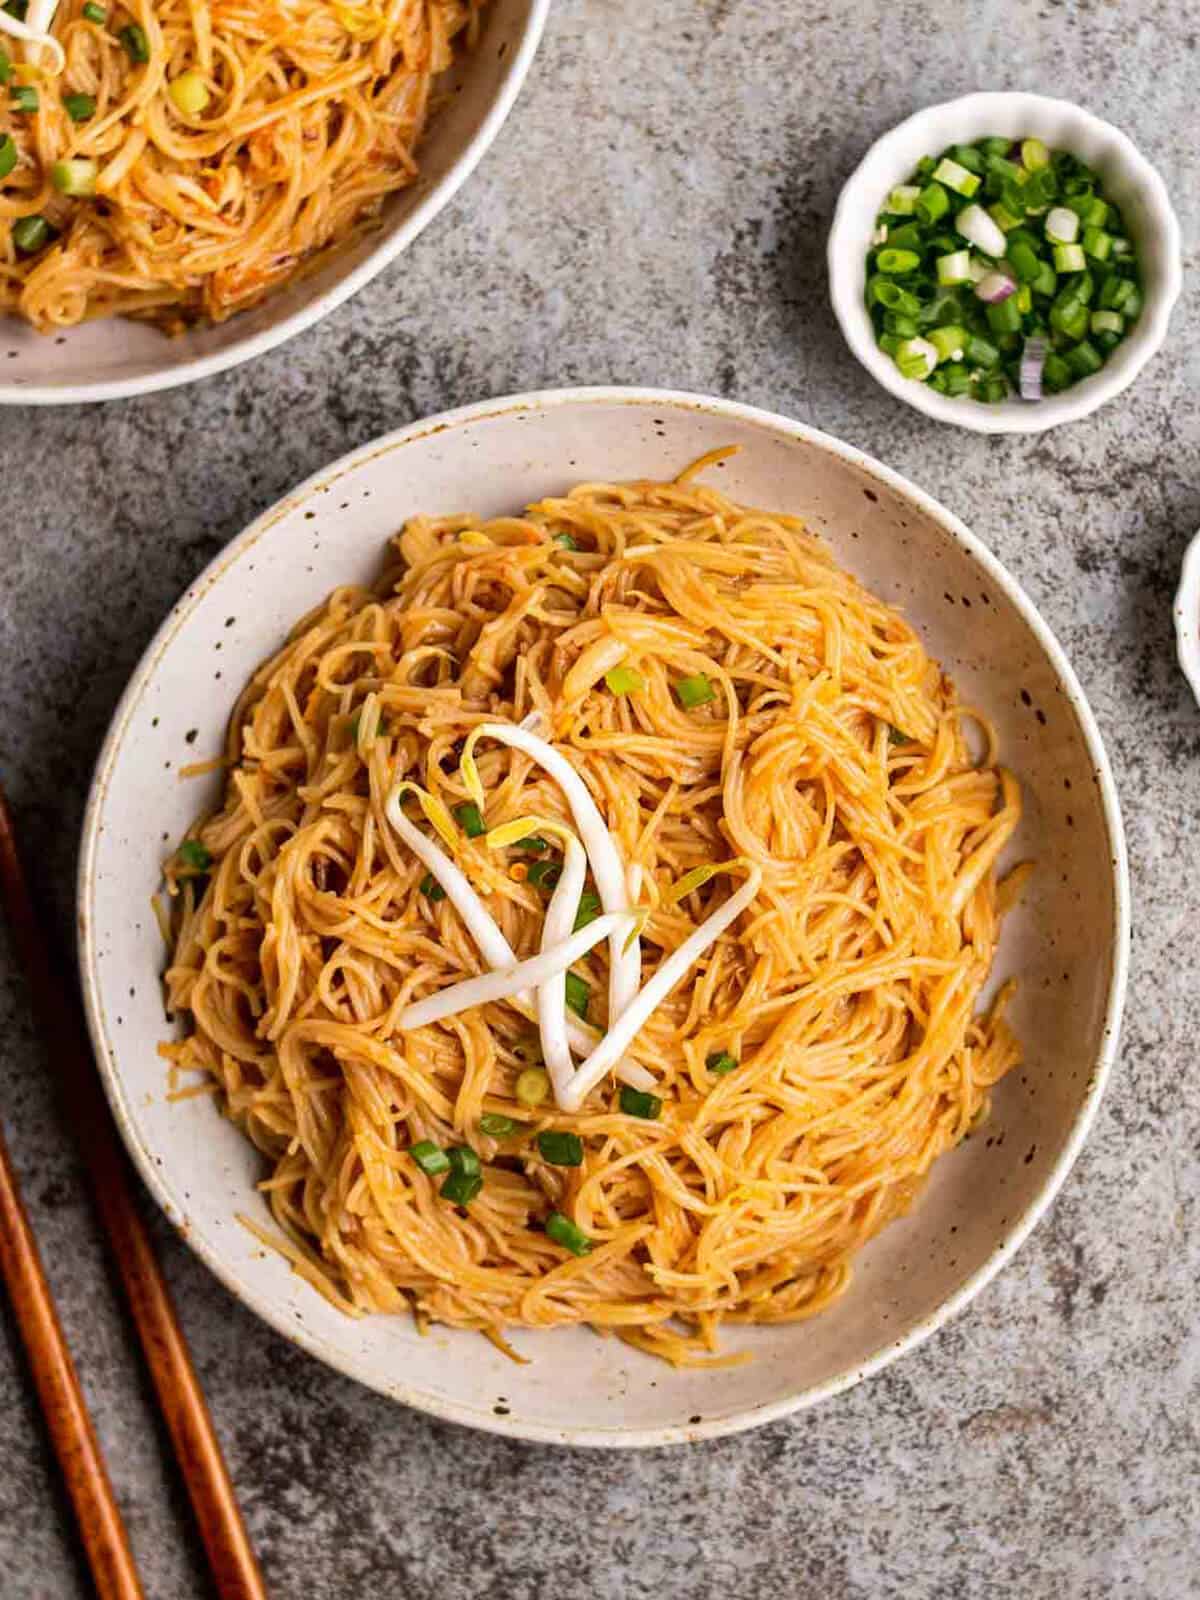 Malaysian noodles with soy bean sprout